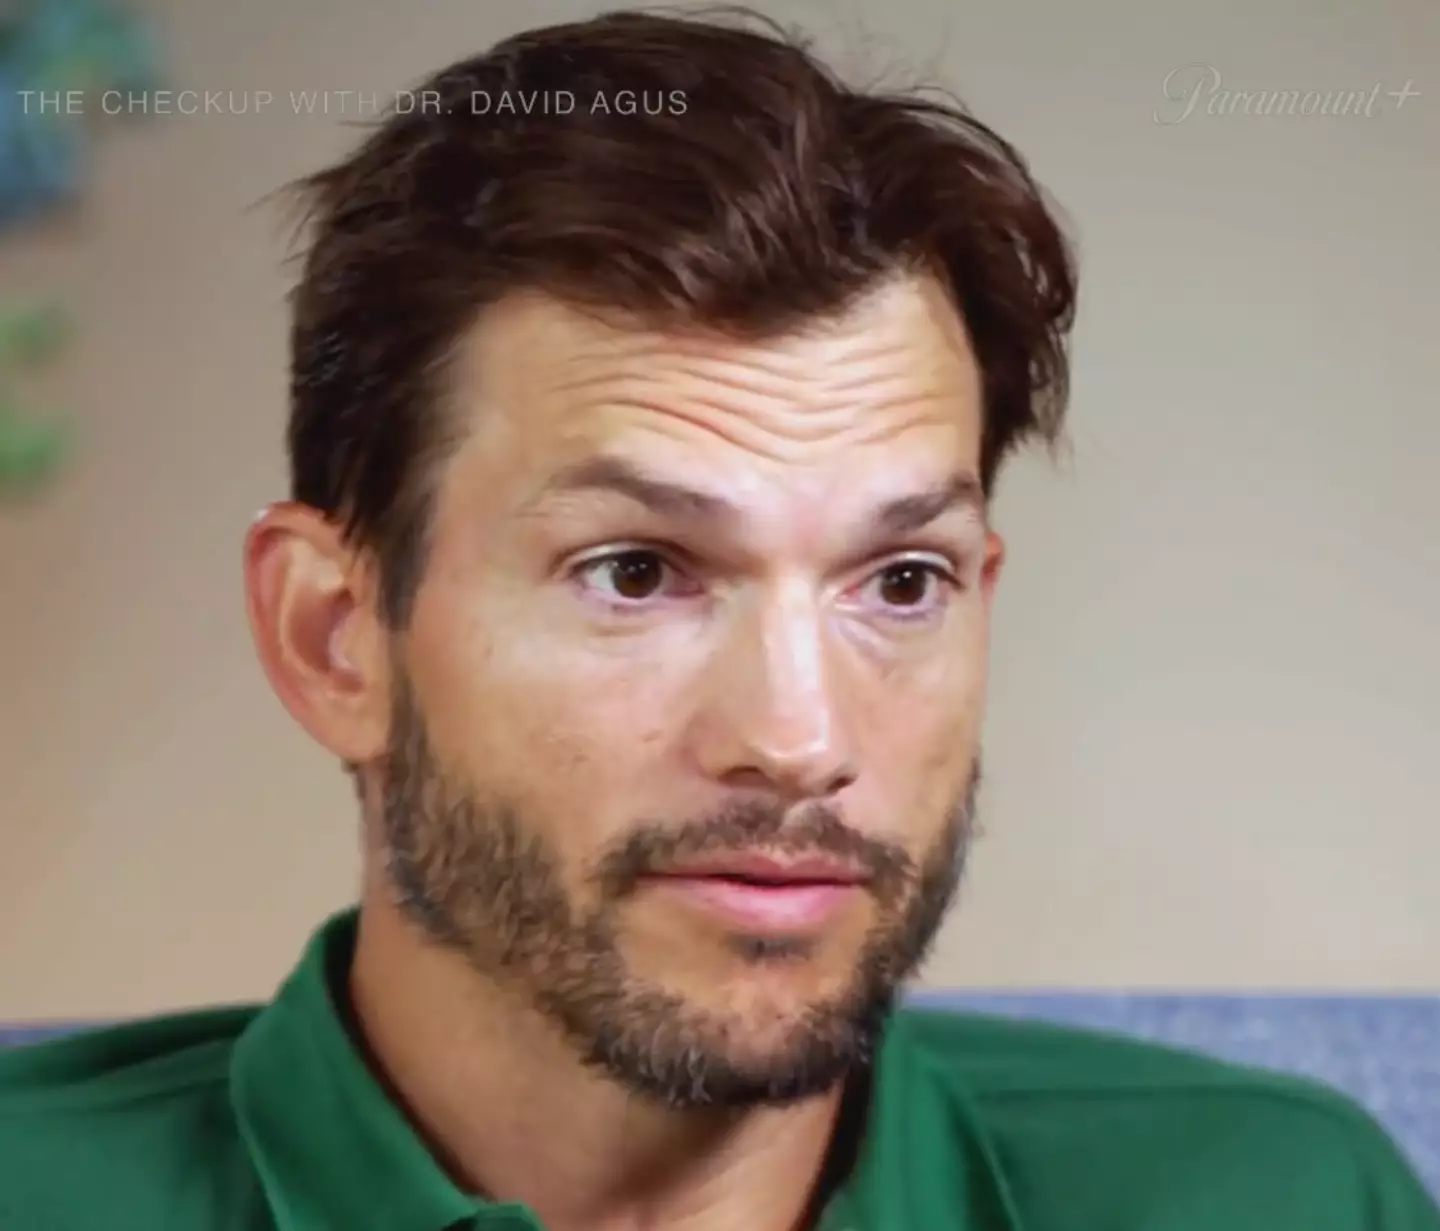 Kutcher has opened up about the terrifying experience.